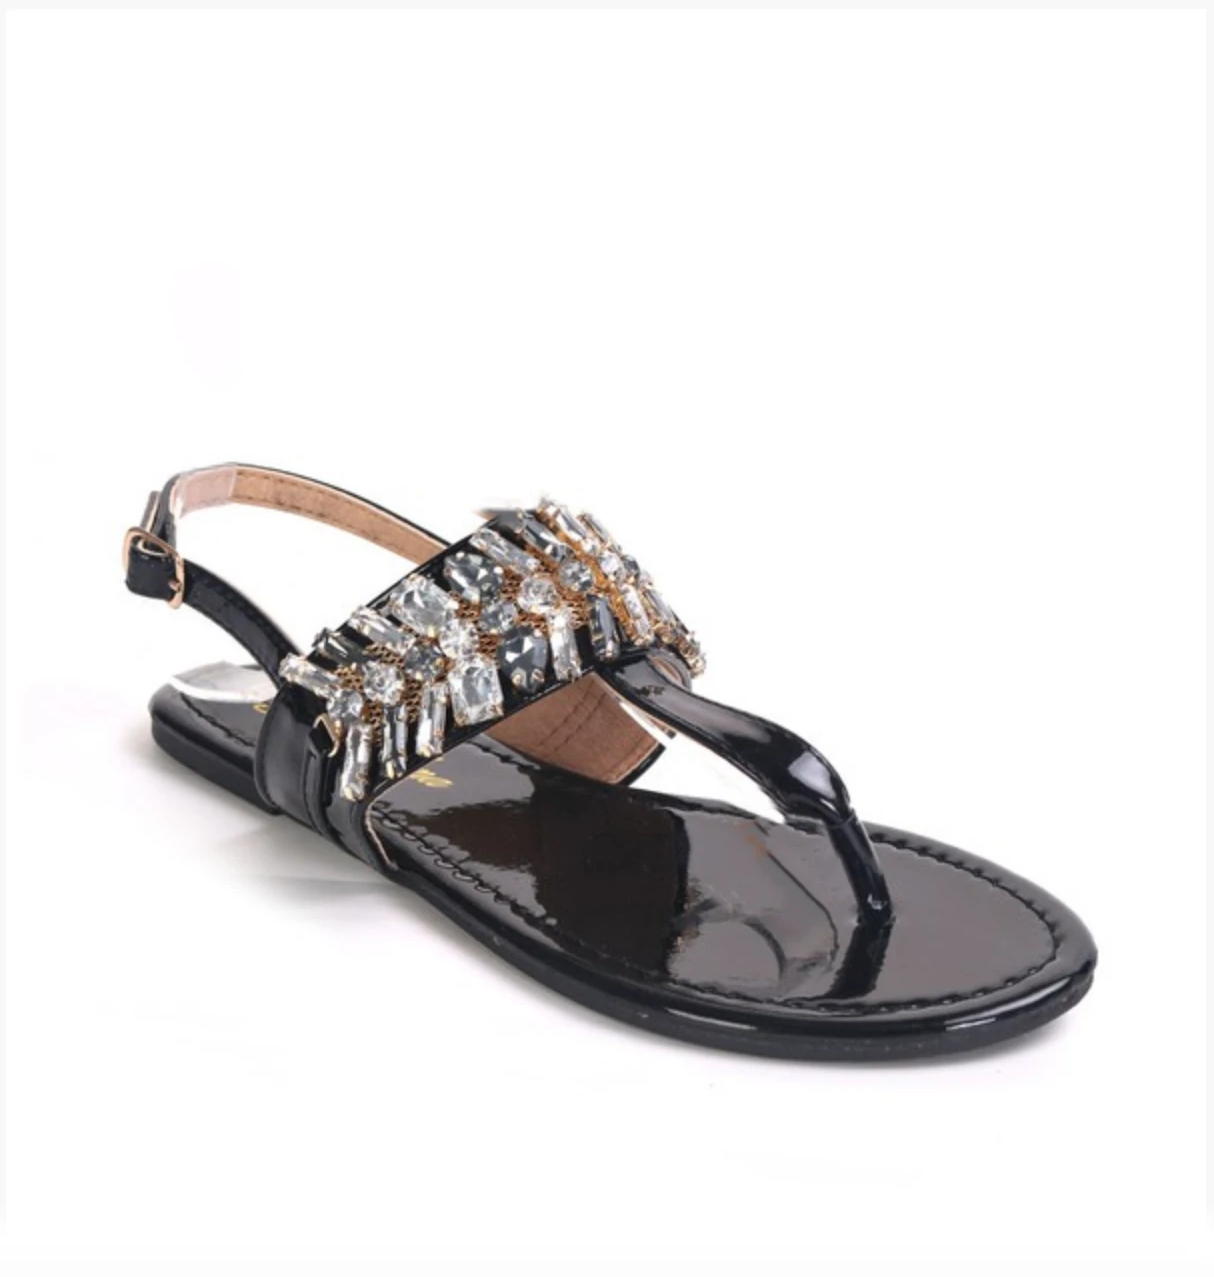 Jeweled Holographic Sandals